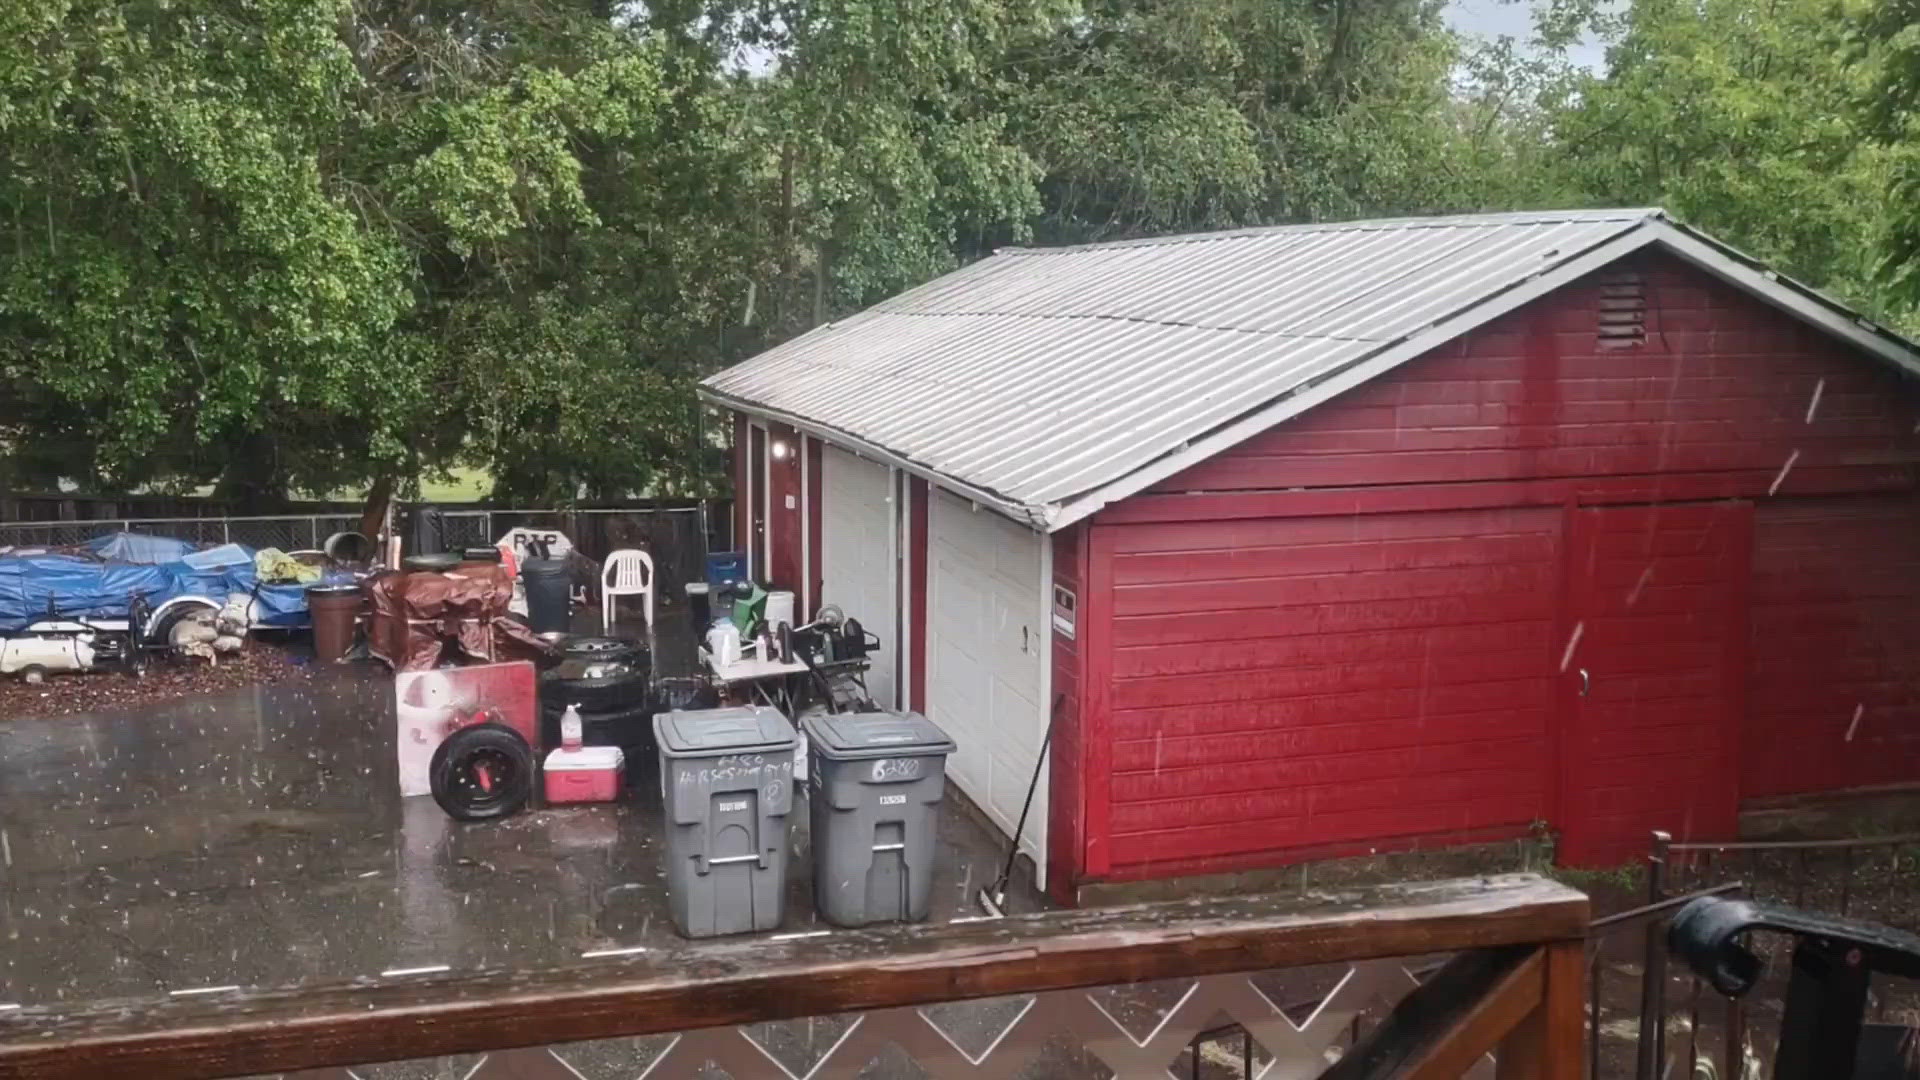 Wild weather here is  mild one passing through Loomis. Some thunder rocked the house
Credit: William Quenneville